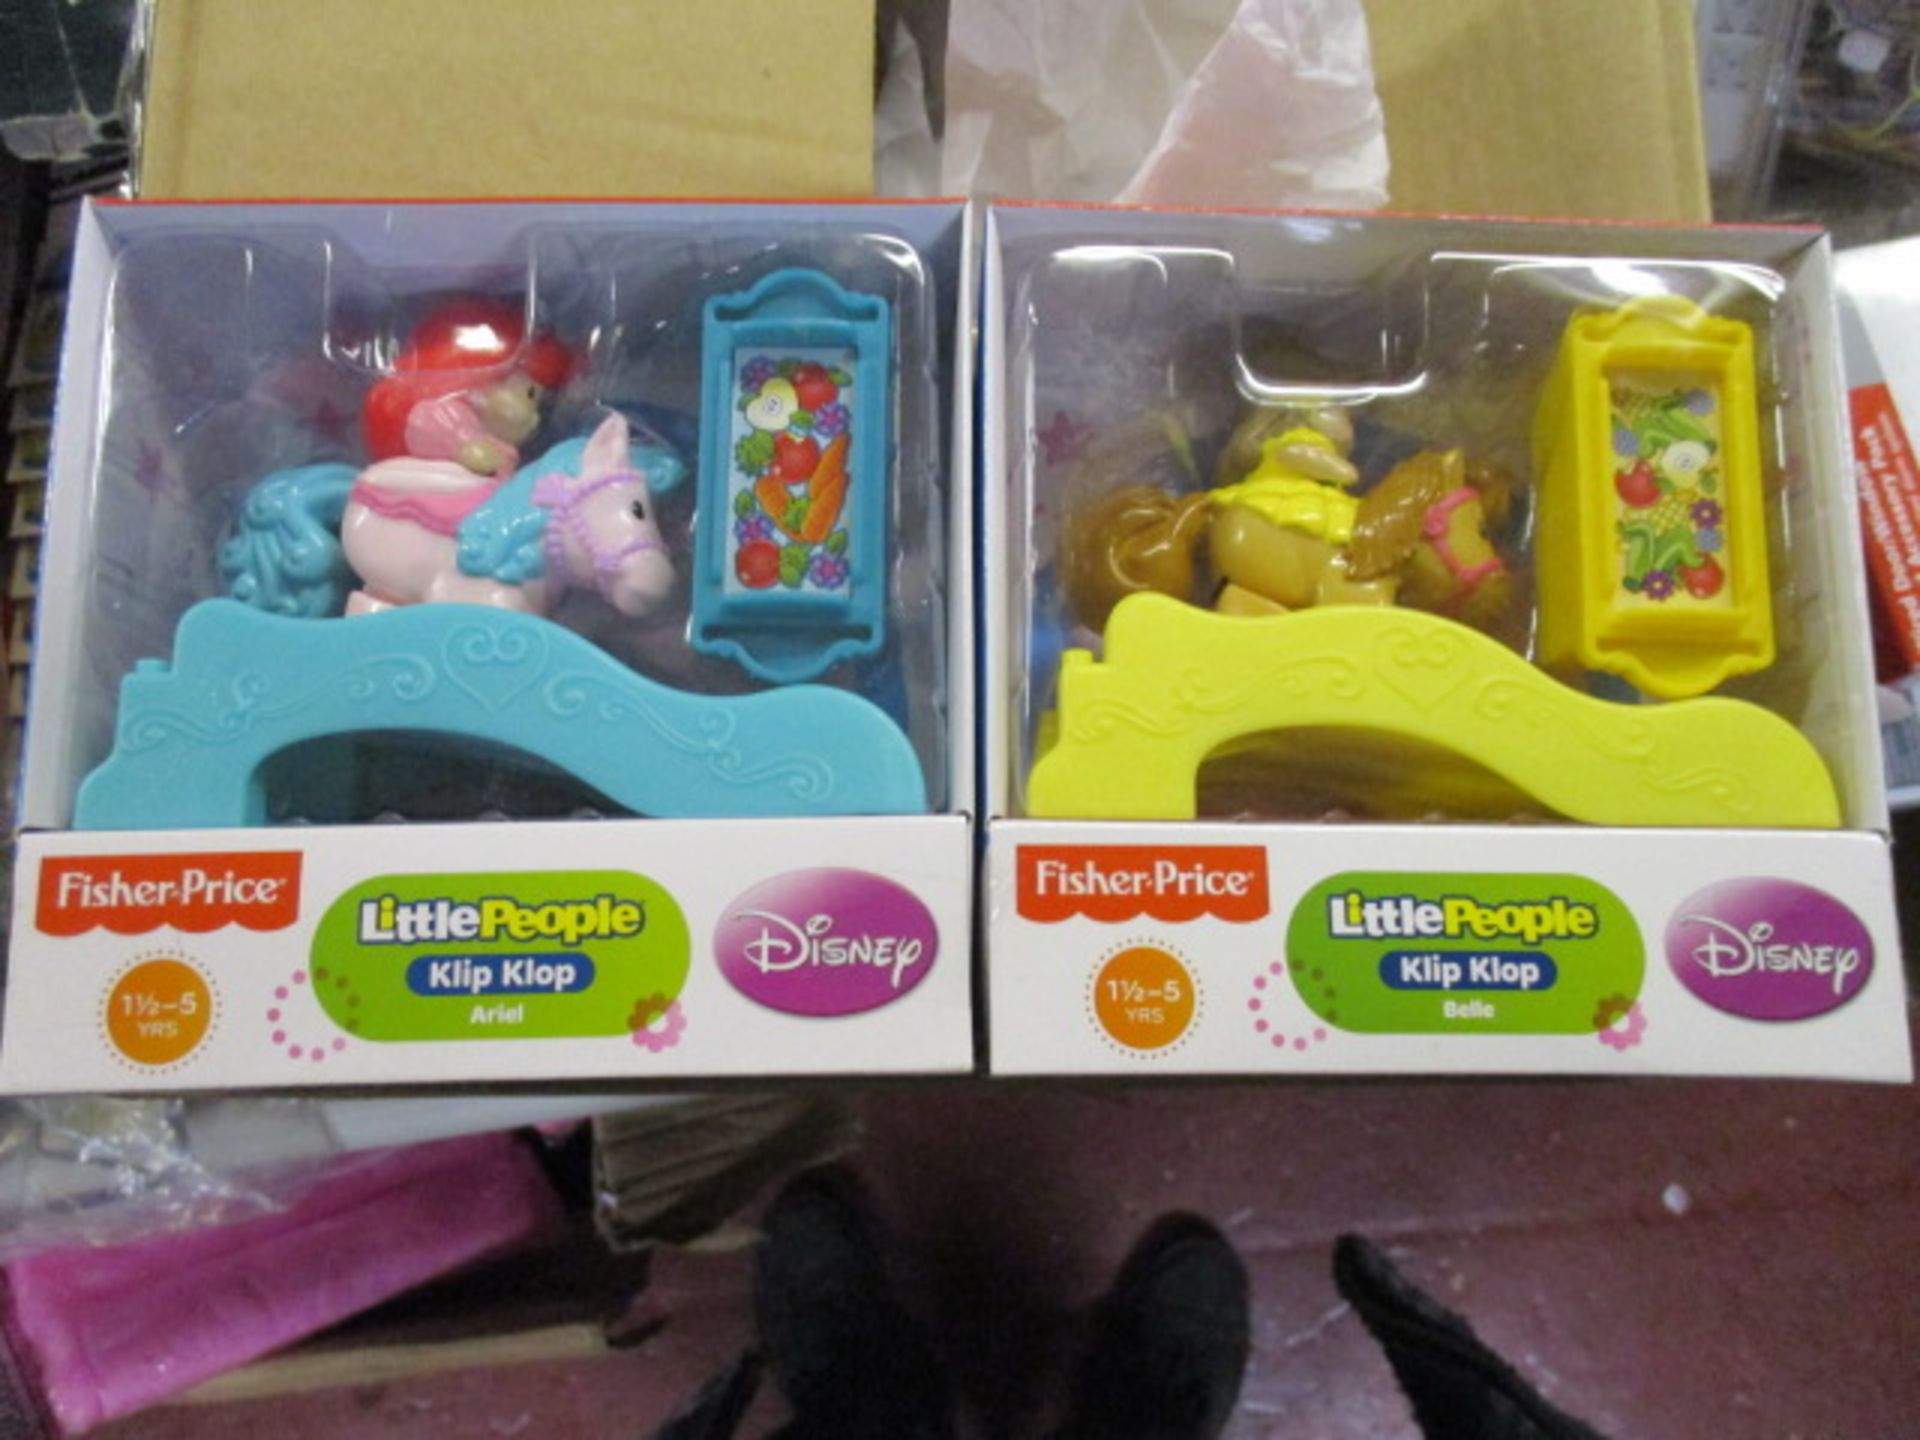 New and sealed Fisher price little people klip klop assorted colours will be picked at random